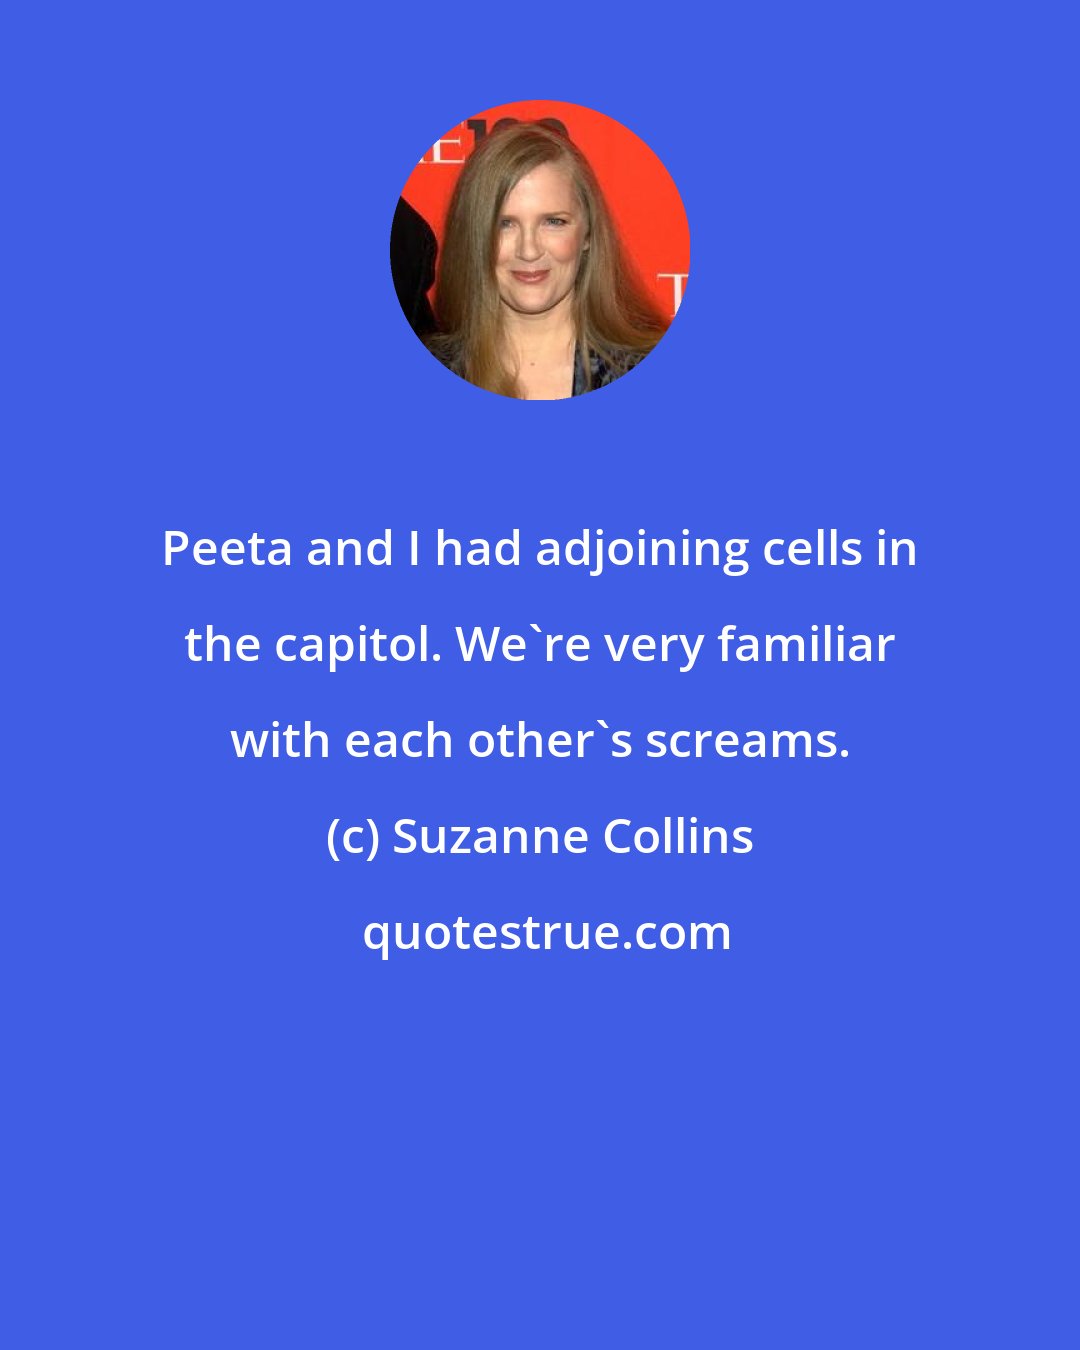 Suzanne Collins: Peeta and I had adjoining cells in the capitol. We're very familiar with each other's screams.